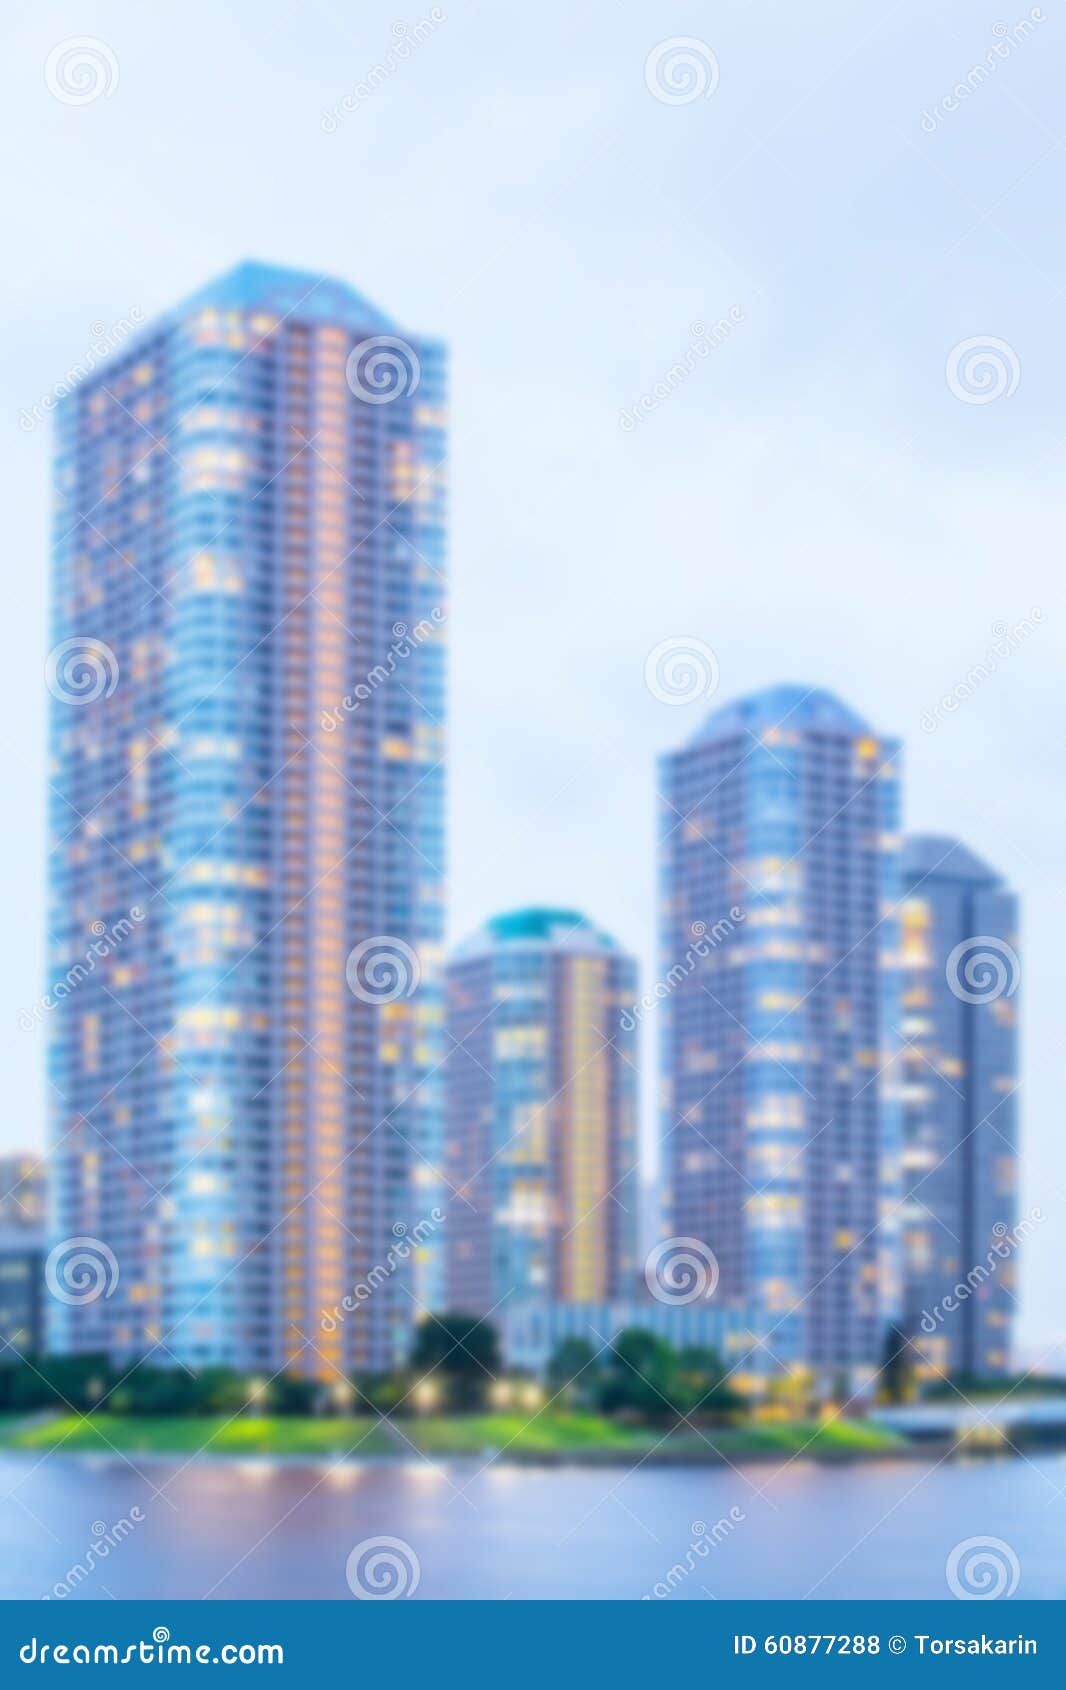 Blurred Background of the High Rise Building Stock Photo - Image of steel,  cityscape: 60877288